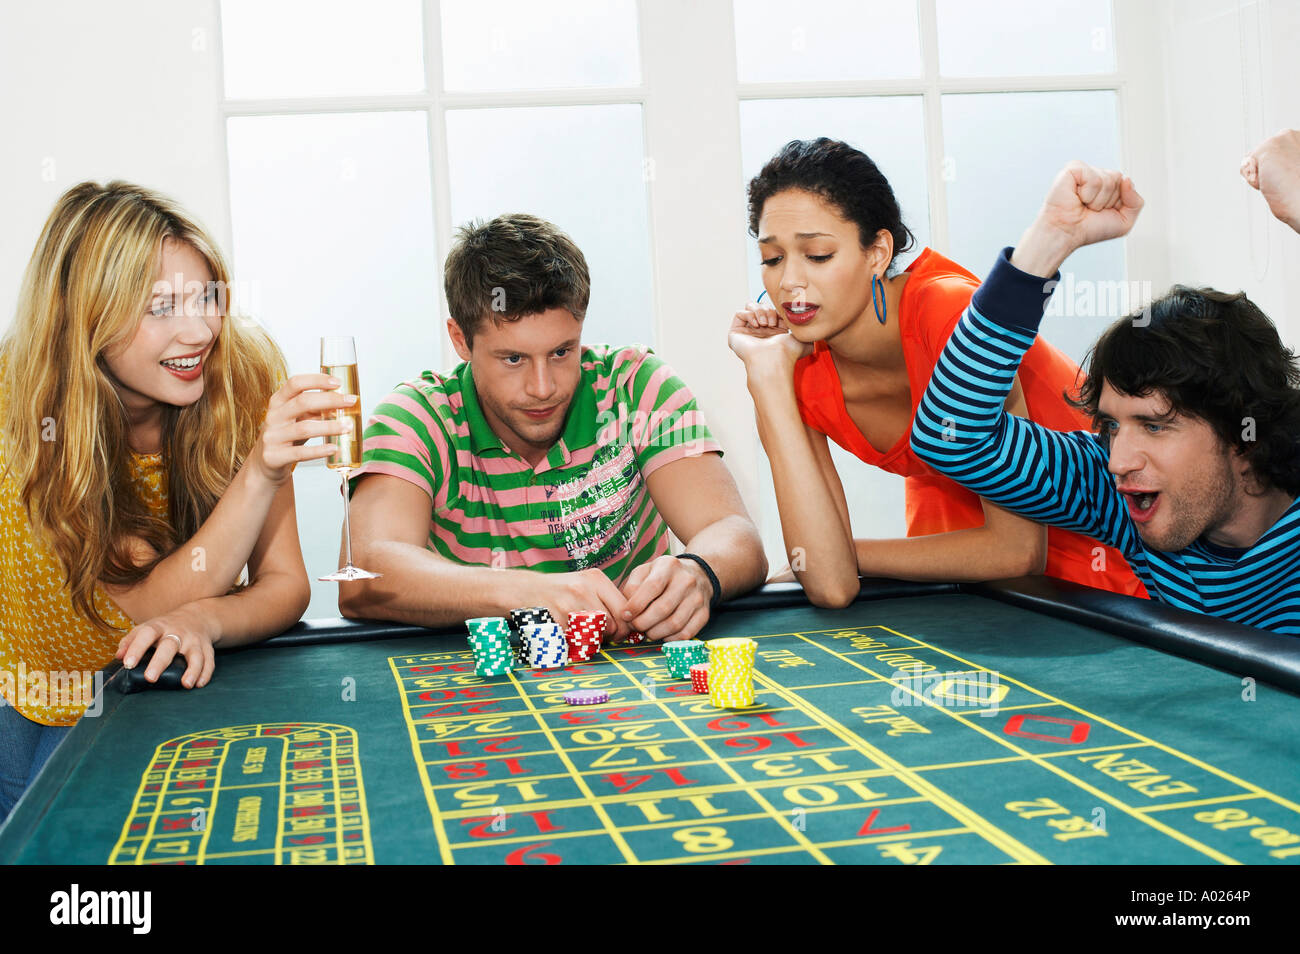 Young man winning on roulette table while friends lose Stock Photo